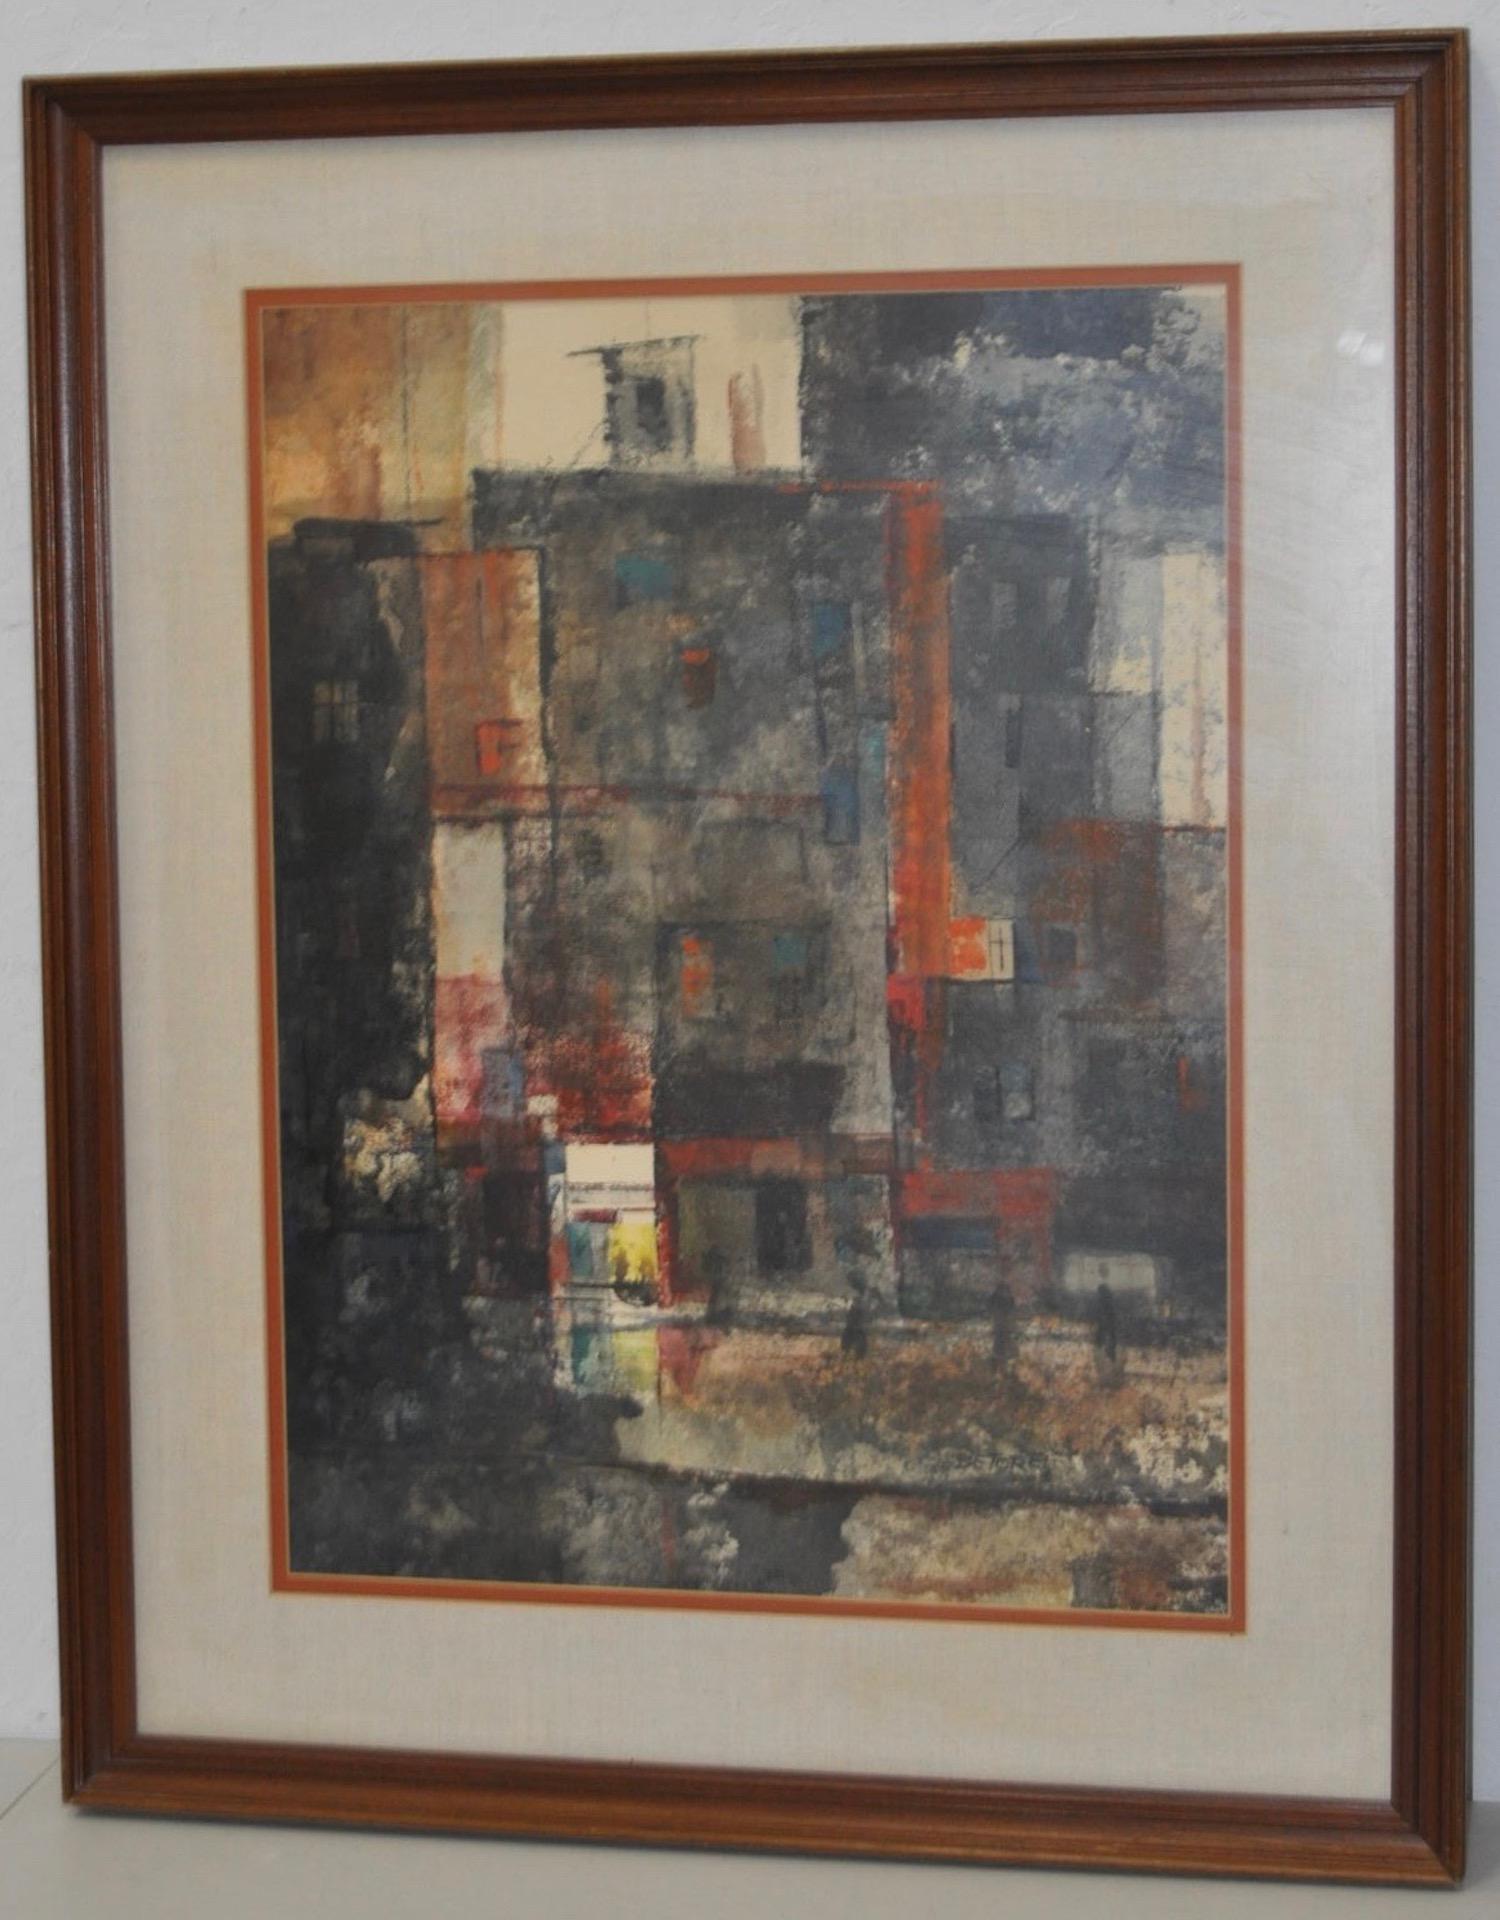 Mid-Century Modern watercolor by John De Tore, circa 1960s

Abstract cityscape. Signed lower right. Beautifully matted and framed.

Dimensions: 19 1/2 inches x 26 inches.

Frame dimensions 29 inches x 36 inches.

A native of Syracuse, John